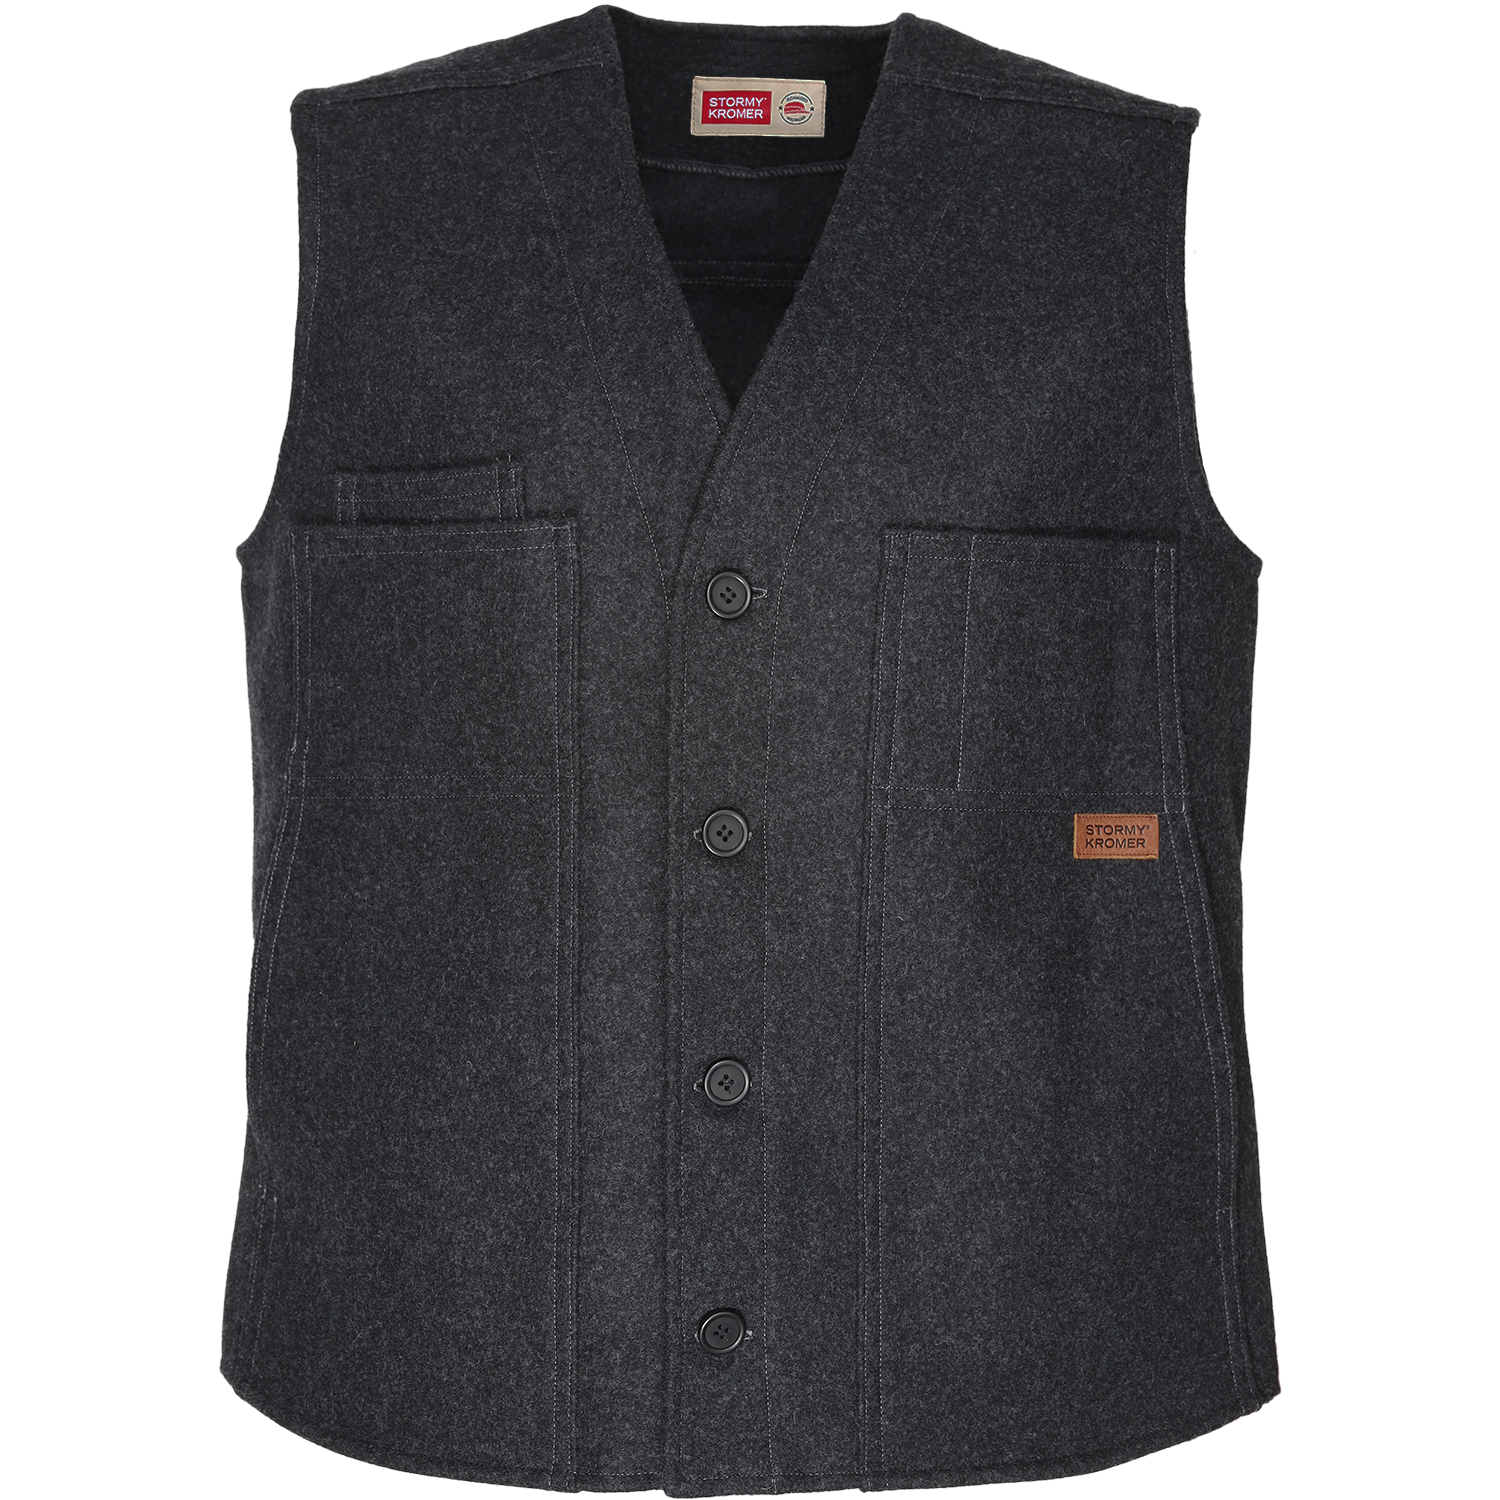 Picture of Stormy Kromer 52510 The Button Vest